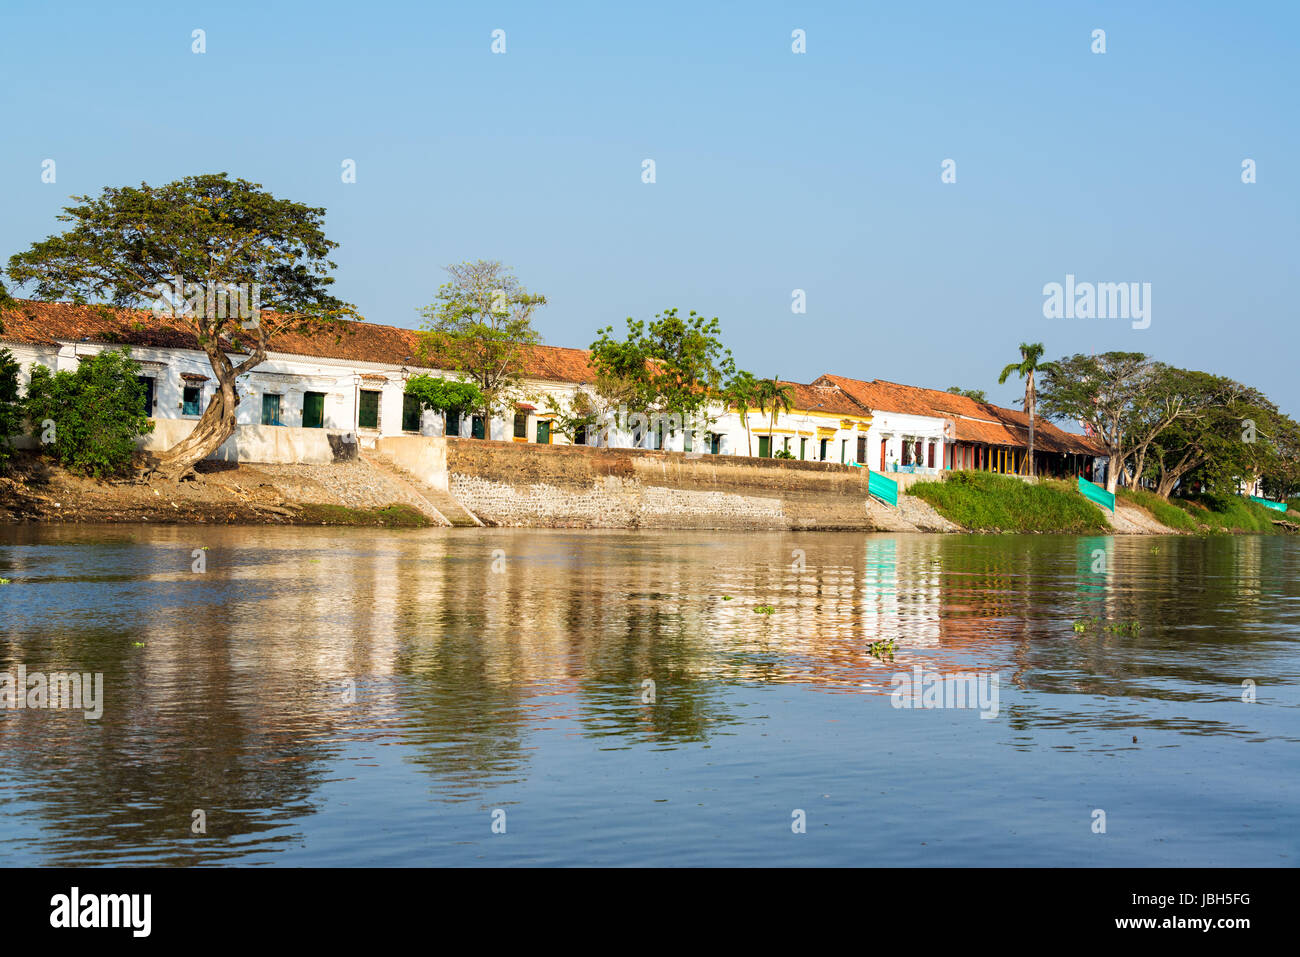 Historic colonial city of Mompox, Colombia reflected in the Magdalena River Stock Photo